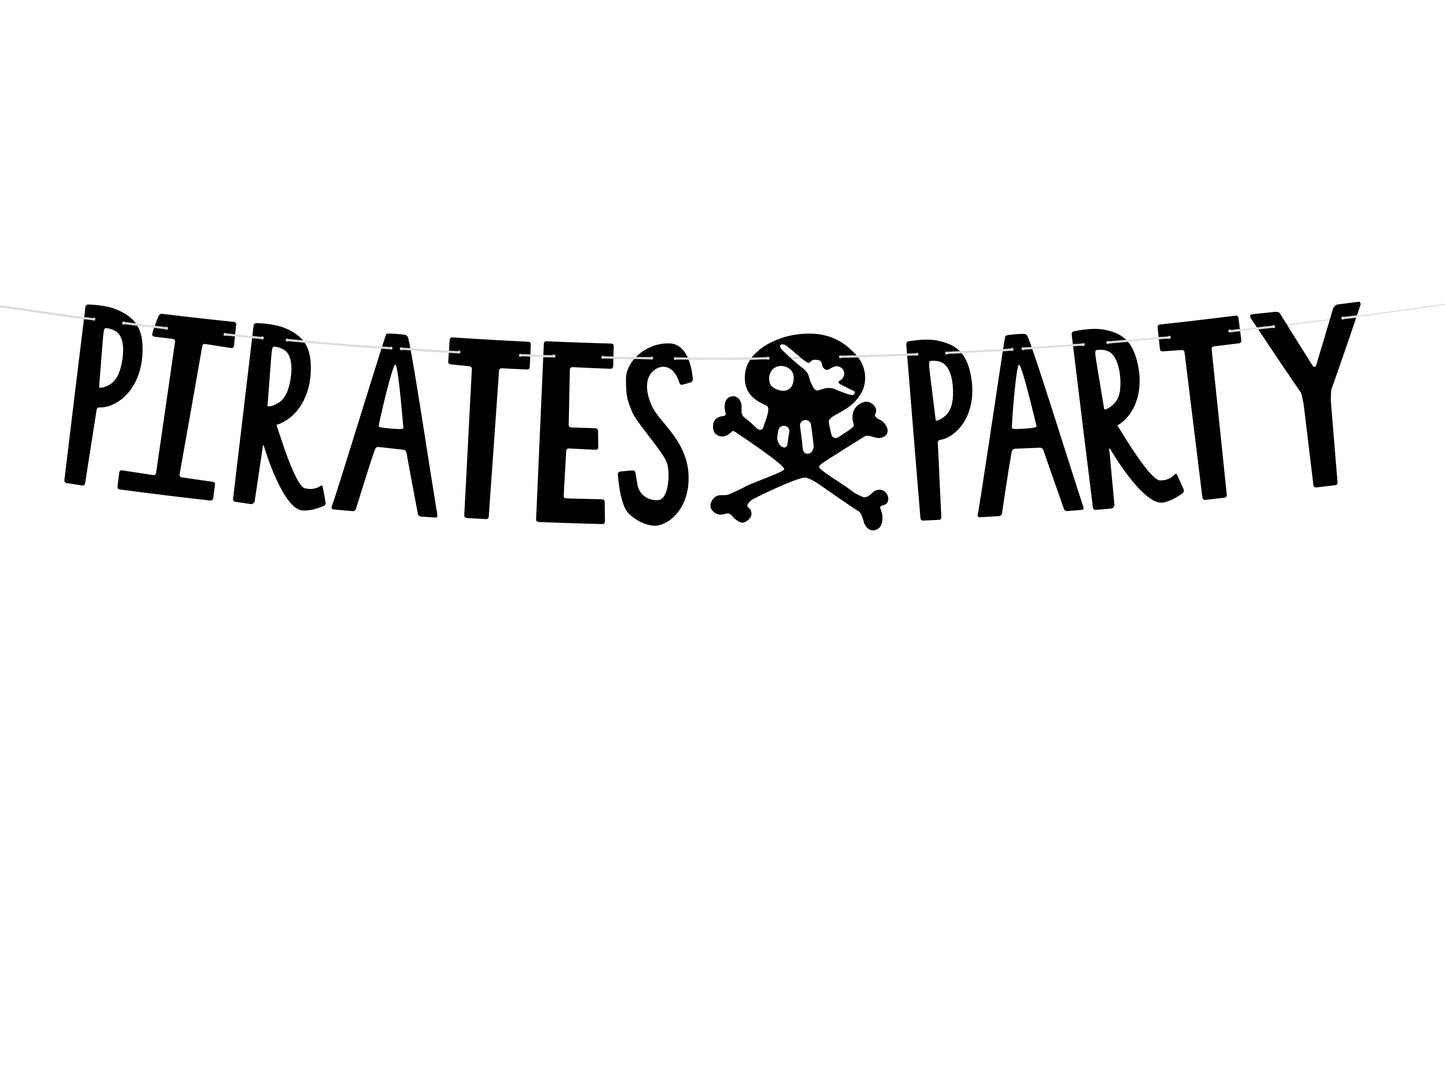 Pirate's Party Skull and Crossbones Banner